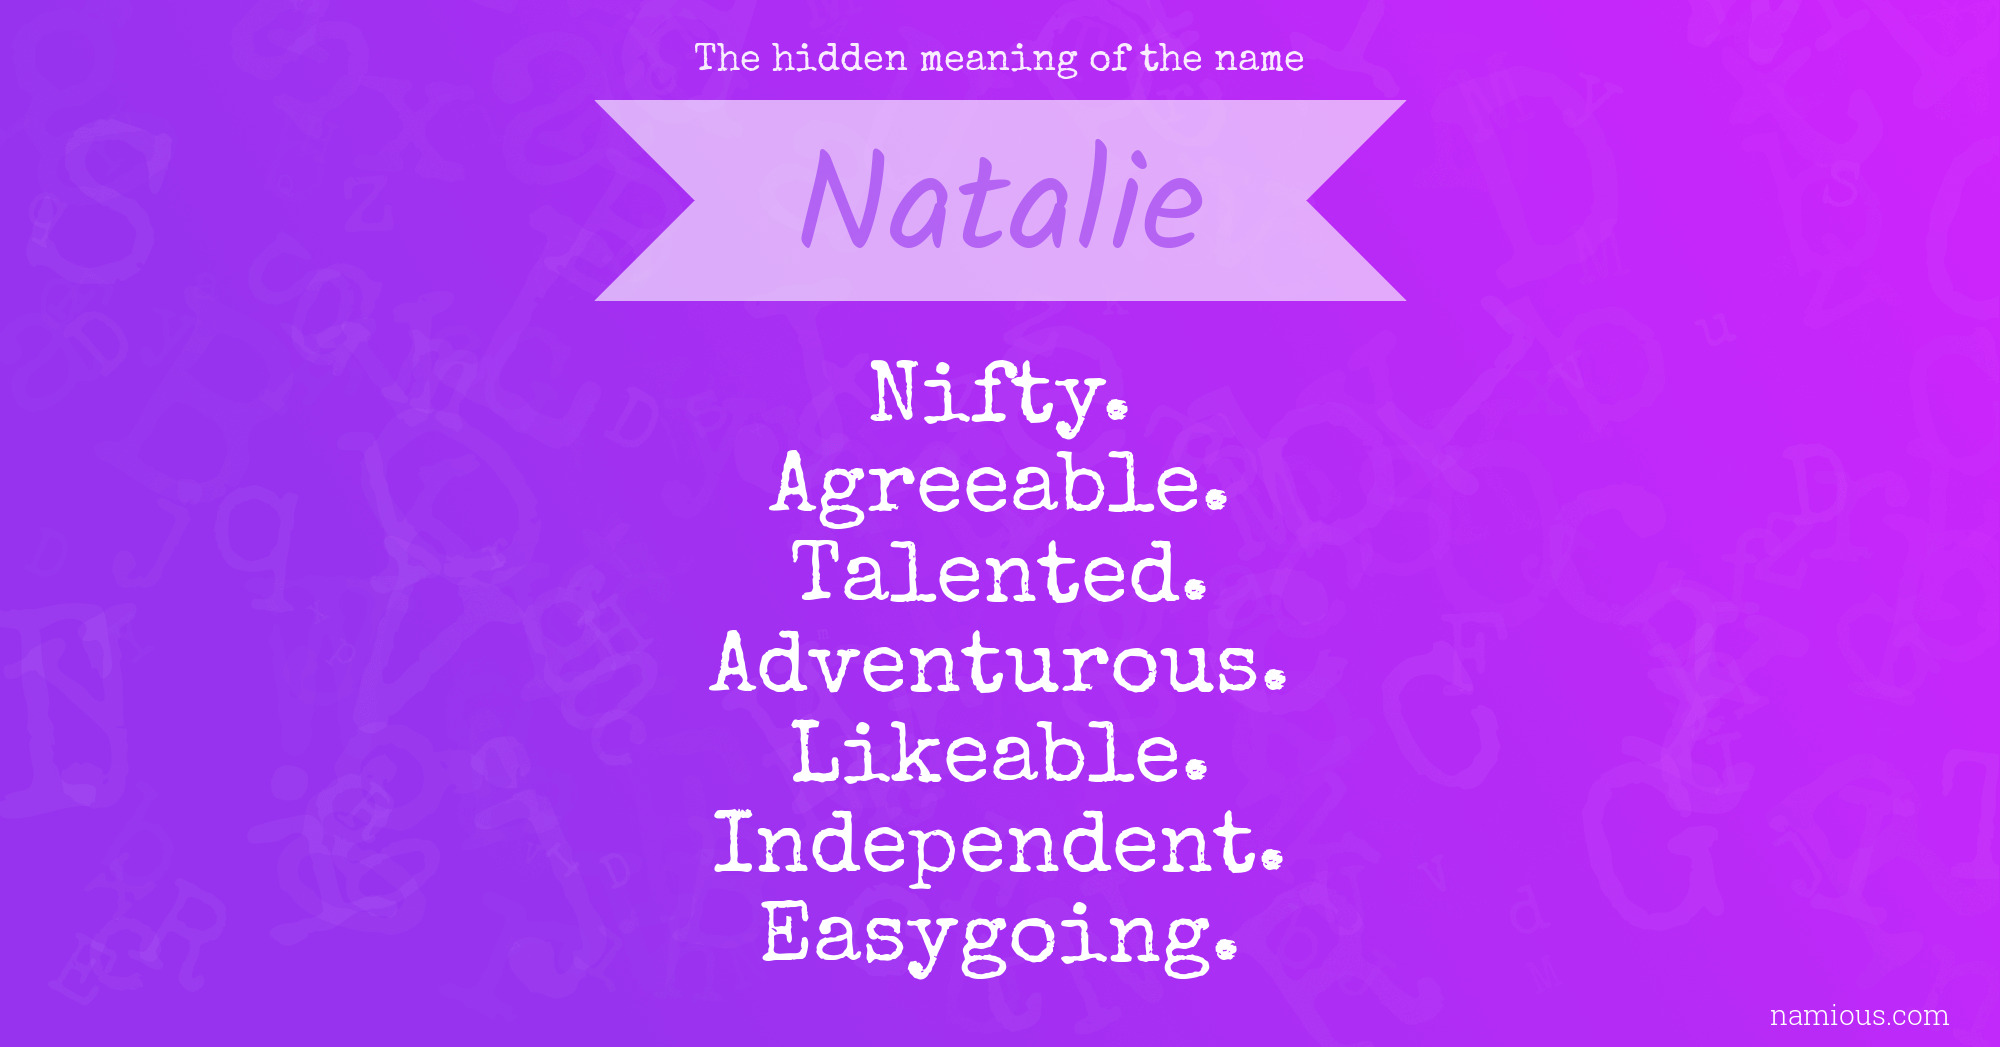 The hidden meaning of the name Natalie